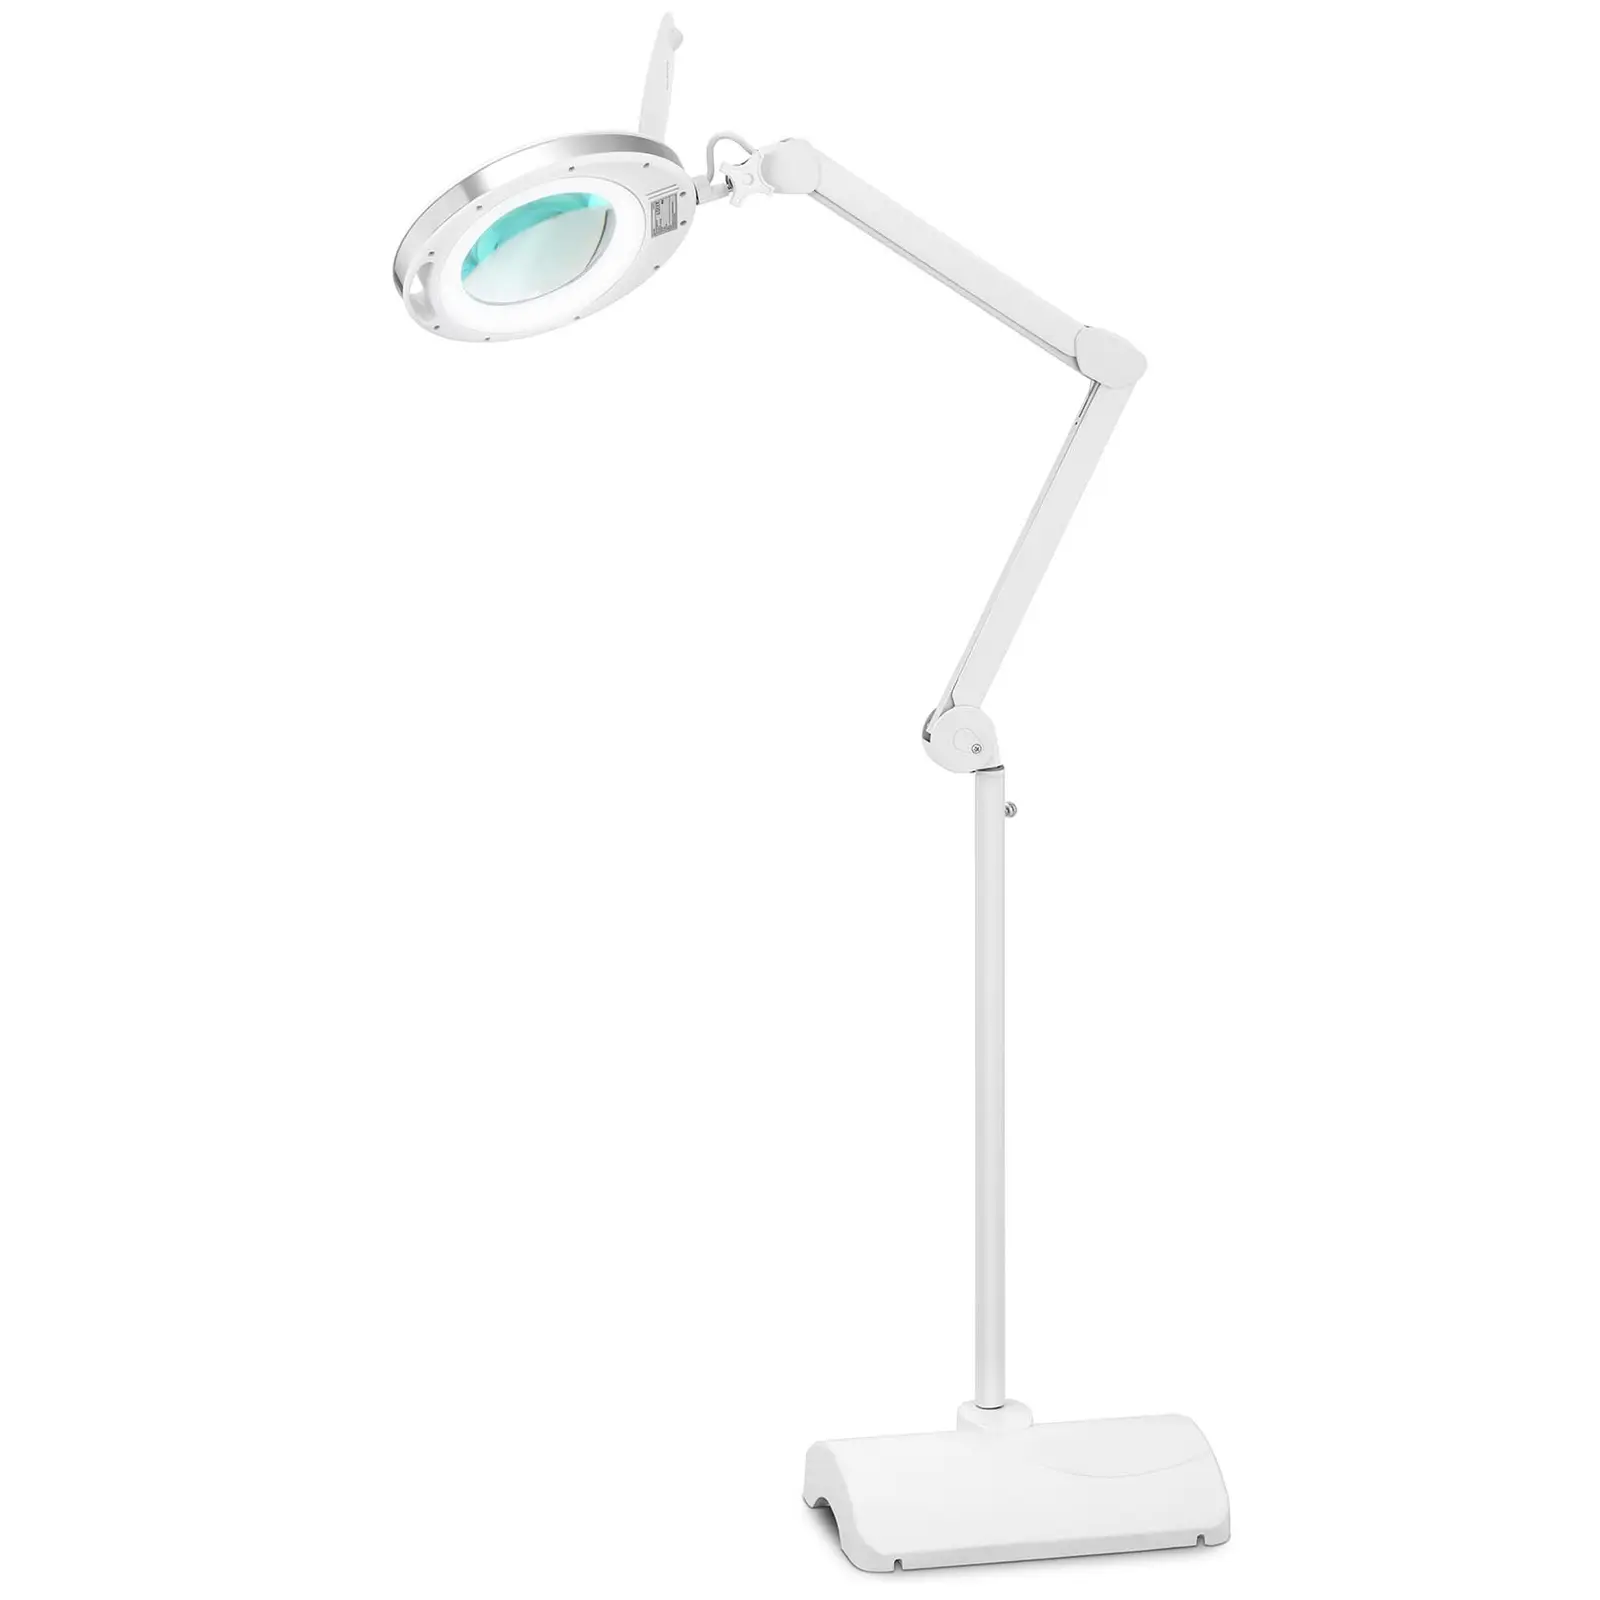 Magnifying Lamp - 5 dpt - 820 lm - 10 W - table clamp